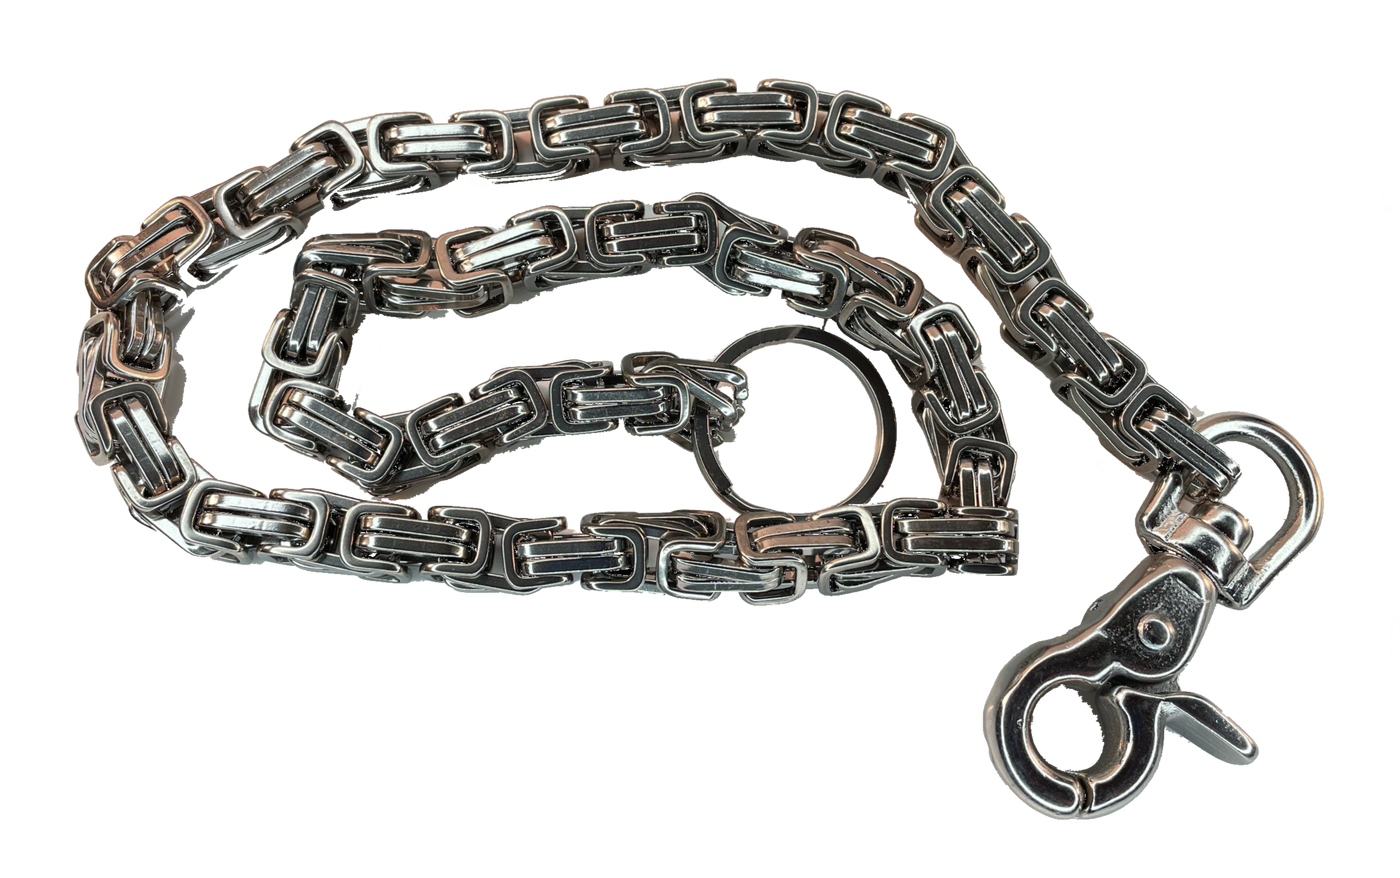 Upgrade your wallet with this Byzantine style, Stainless Steel, Heavy Duty wallet chain. The sturdy keychain on one end attaches to your wallet, while the clasp on the other end attaches to YOU! The stainless steel will not peel nor turn color. Available online or in our shop just outside Nashville in Smyrna, TN. Dimensions: 1/2" squared, 25" in length, about 13 oz in weight, clasp style may vary.